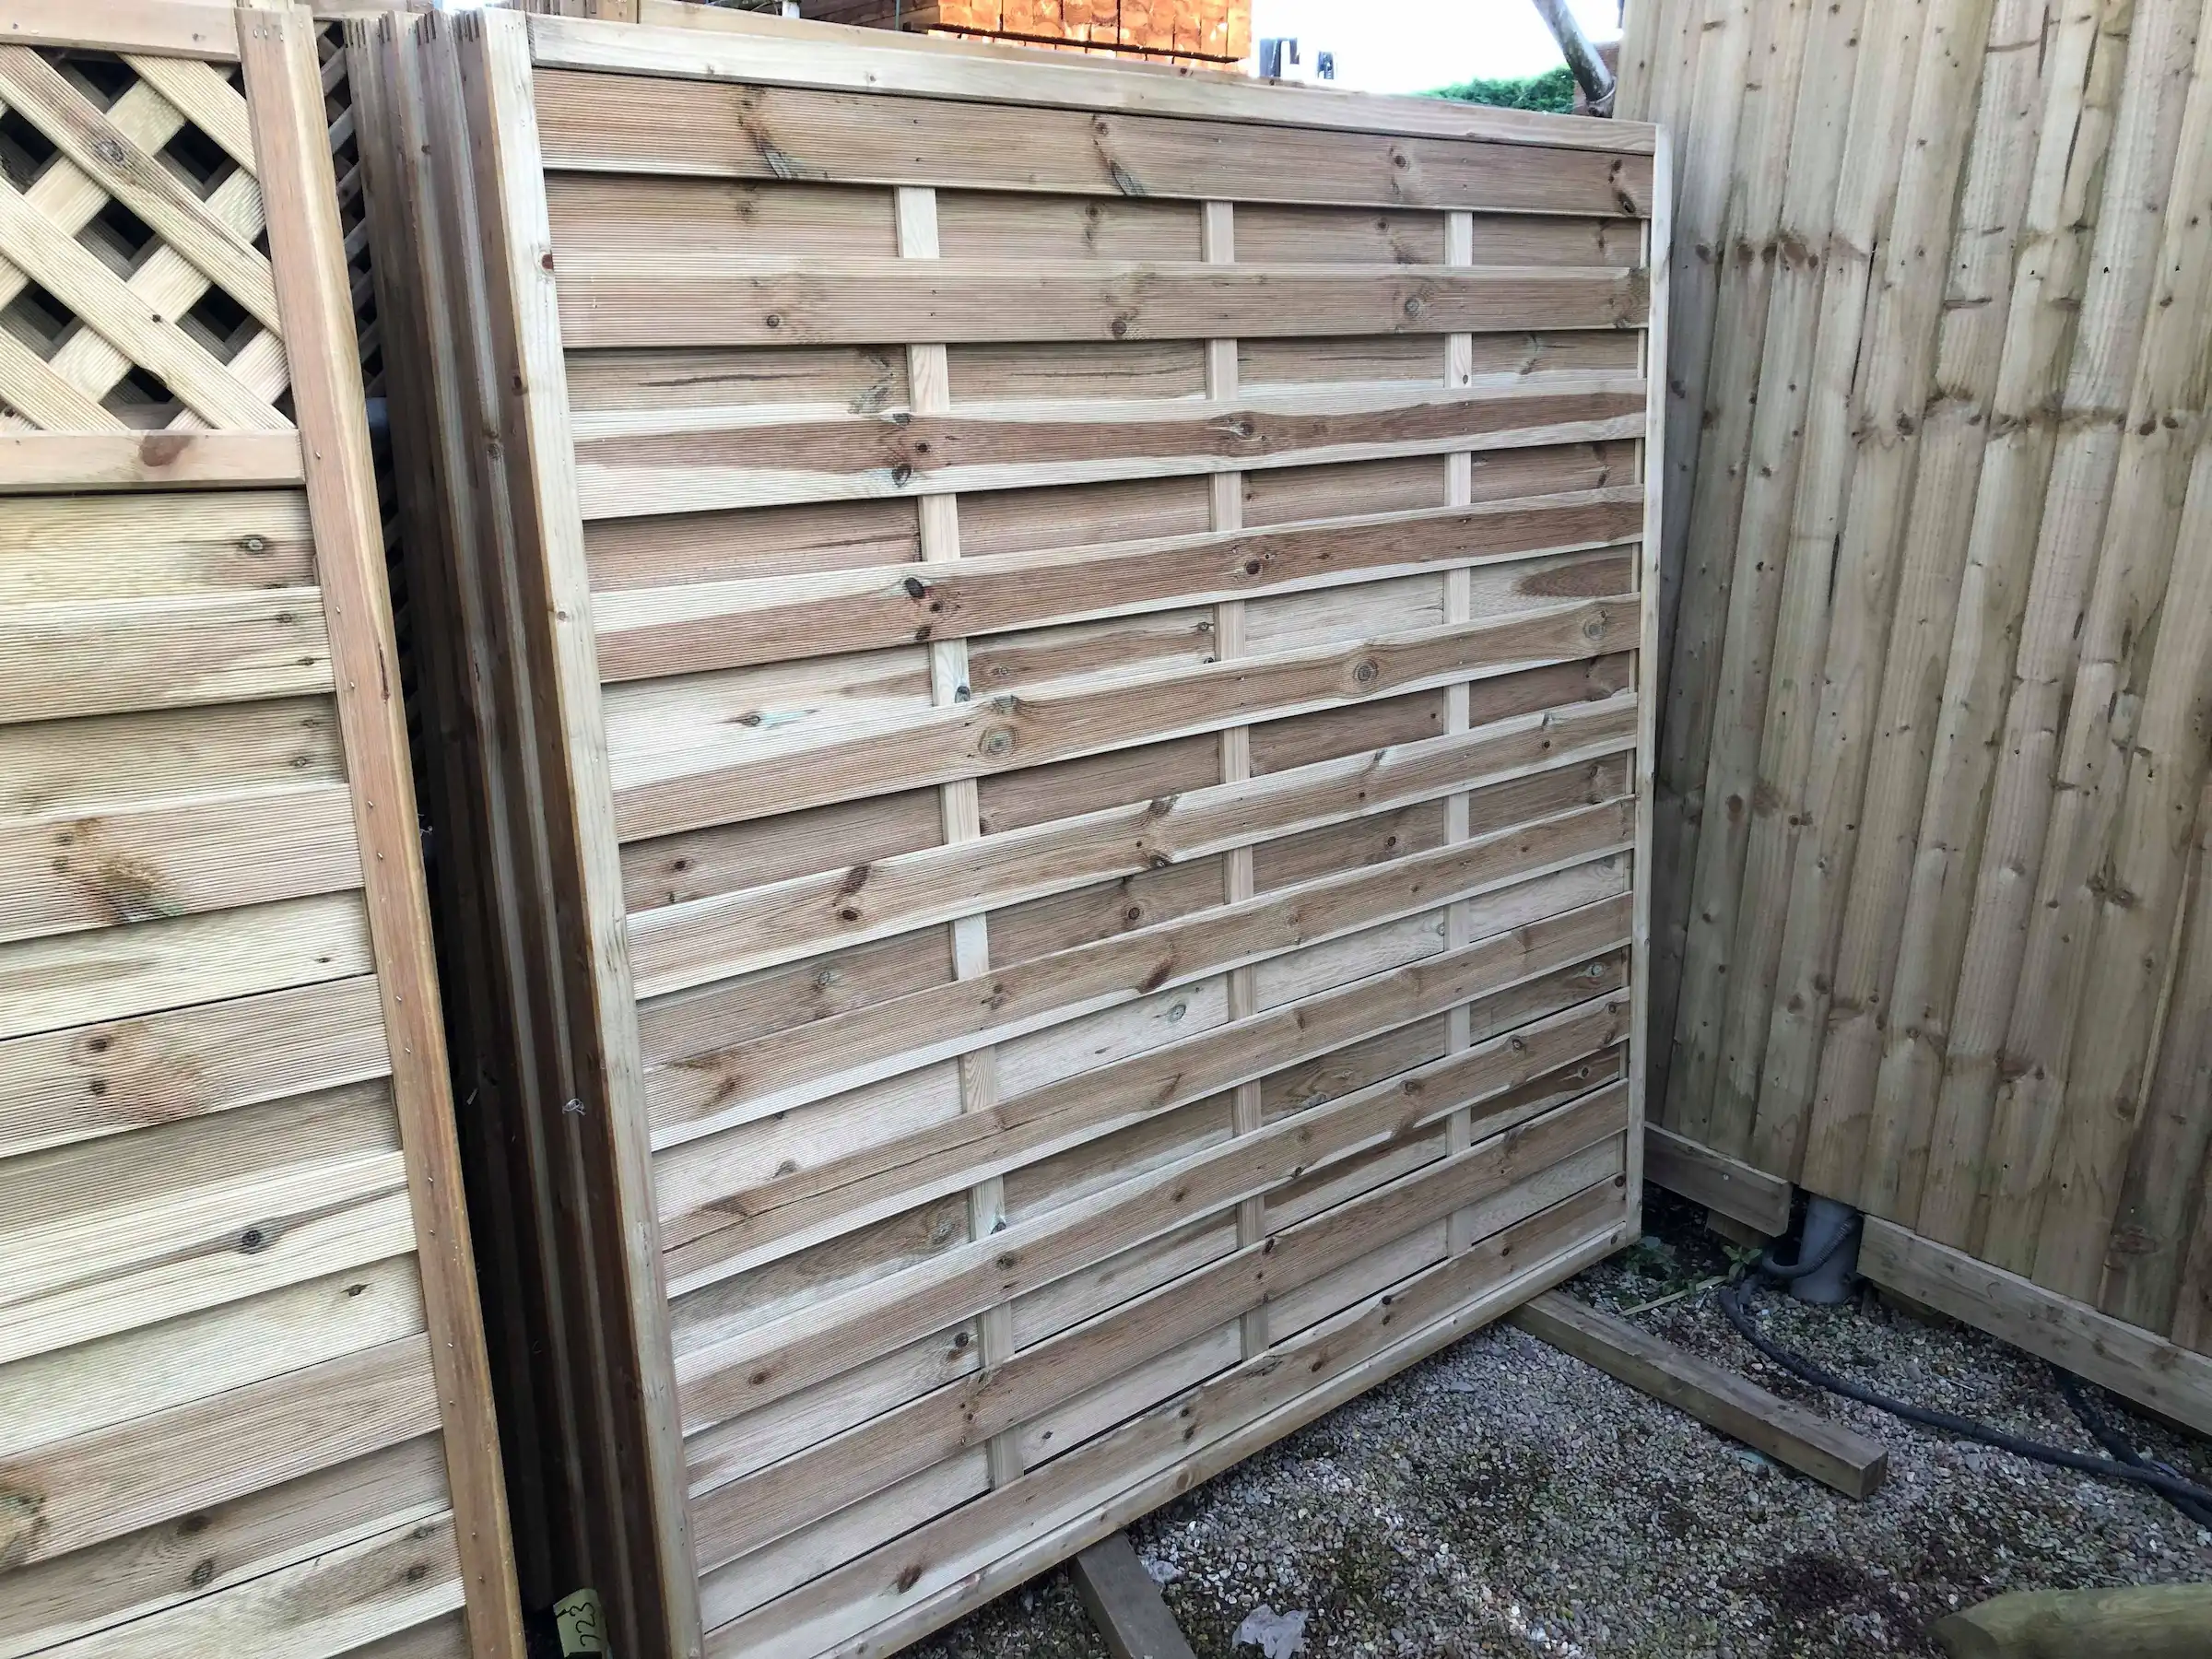 Elite esprit fence panels for sale in Hampshire and Salisbury.